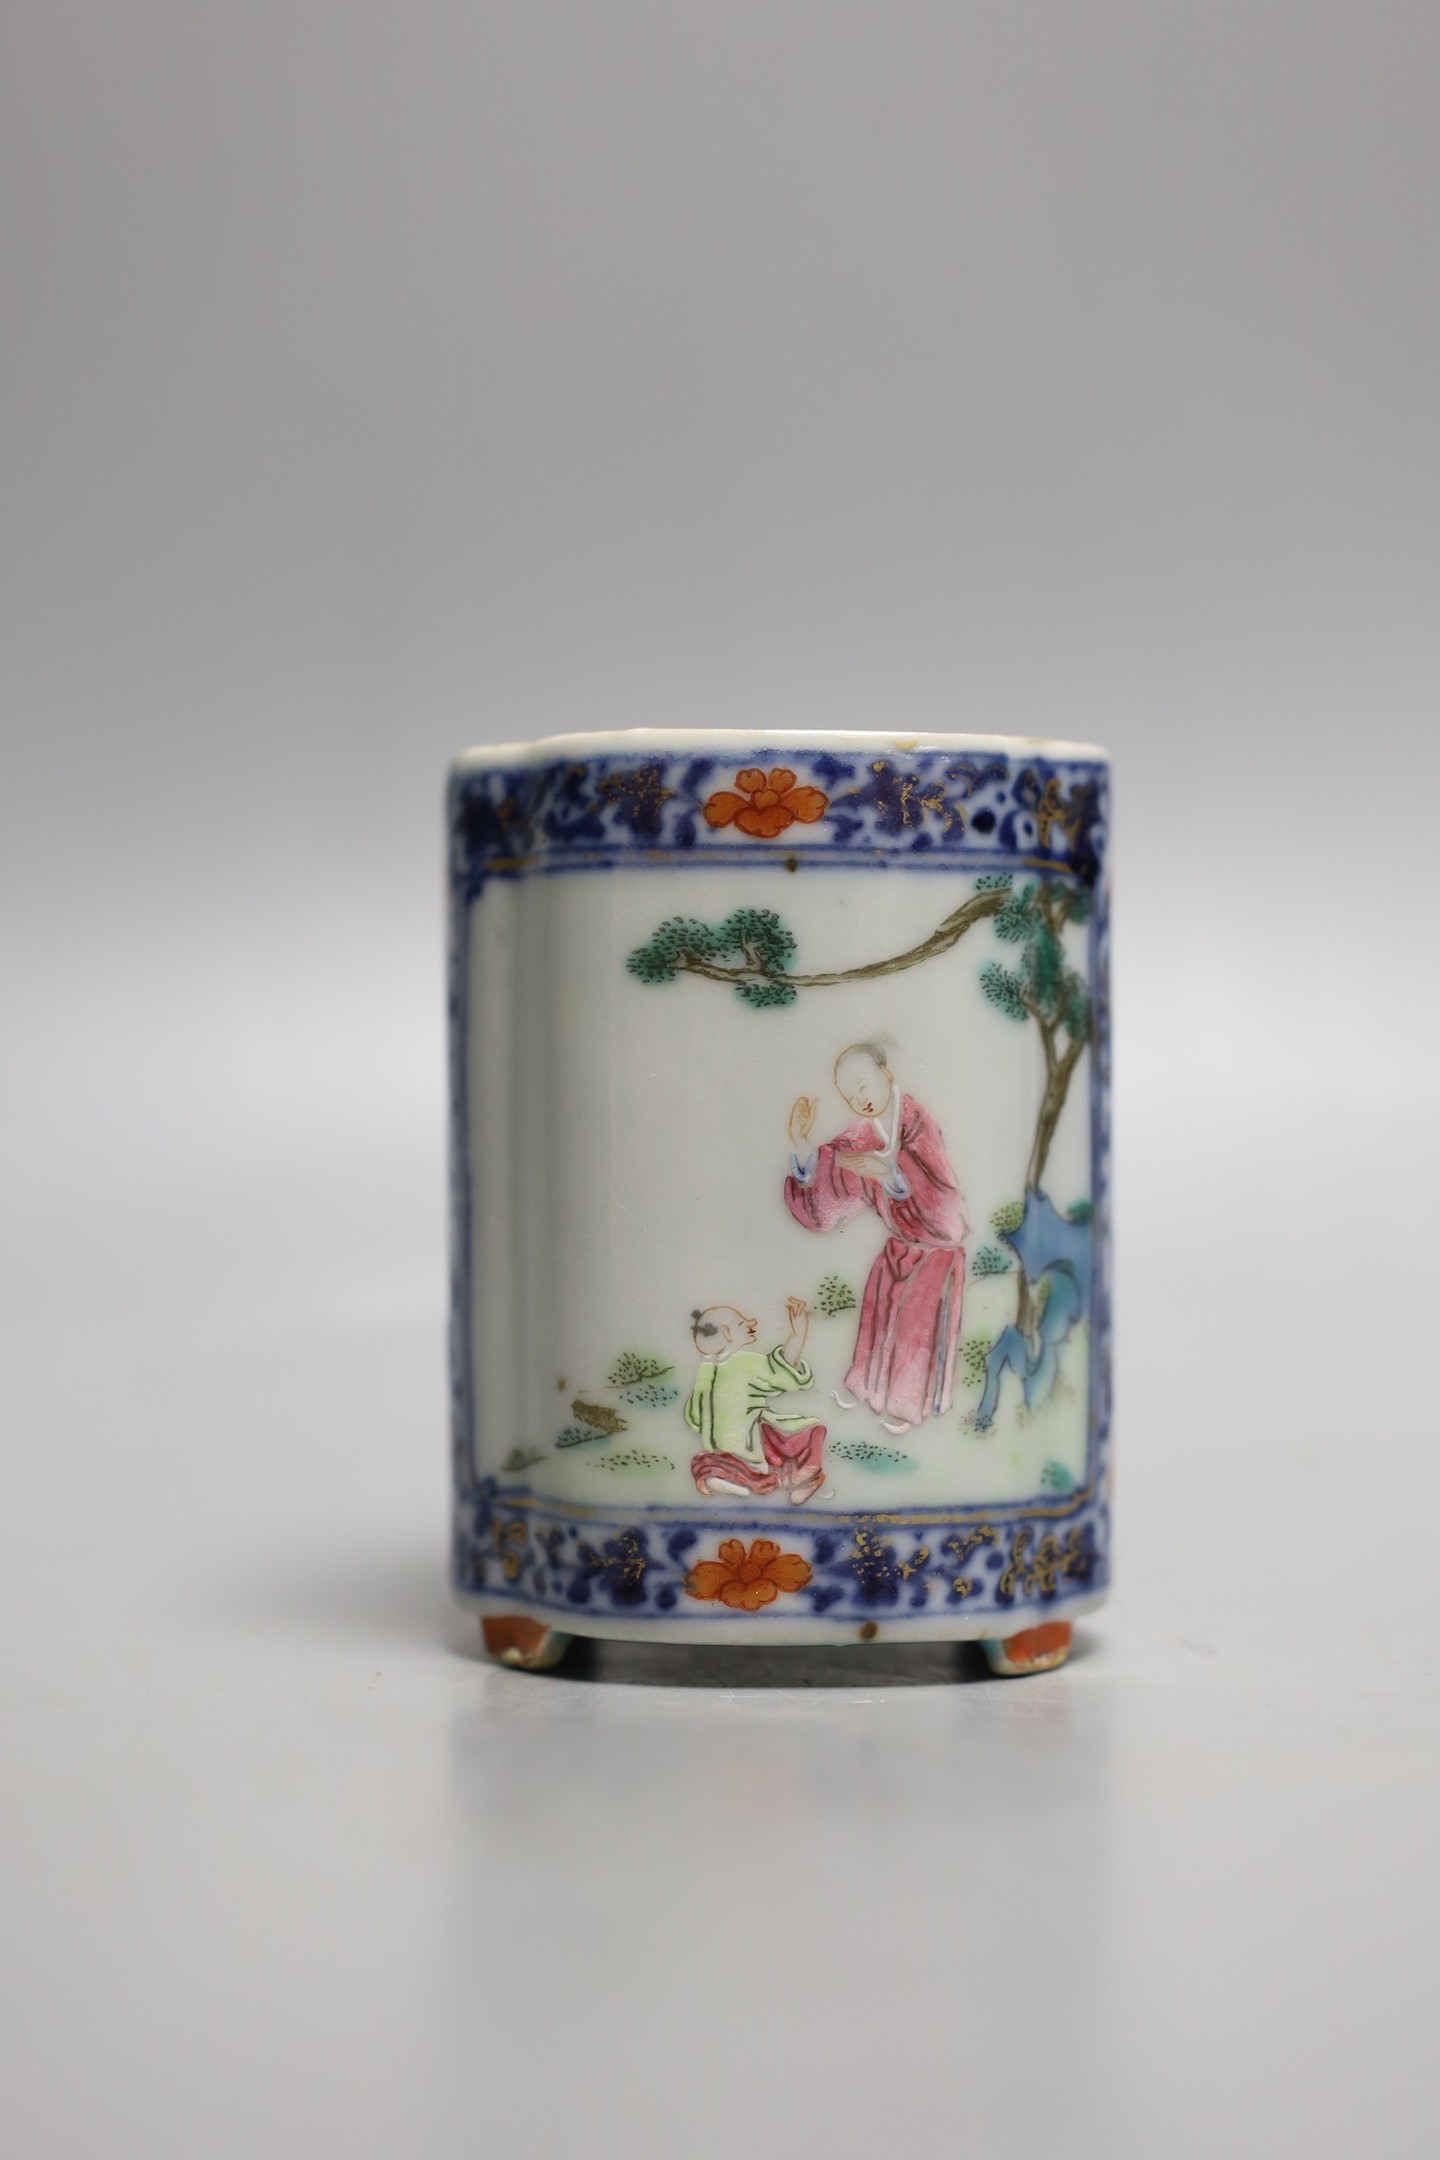 A Chinese famille rose fencai brush pot, Qianlong seal mark but 19th century, 8.1 cm high, wear to gilding